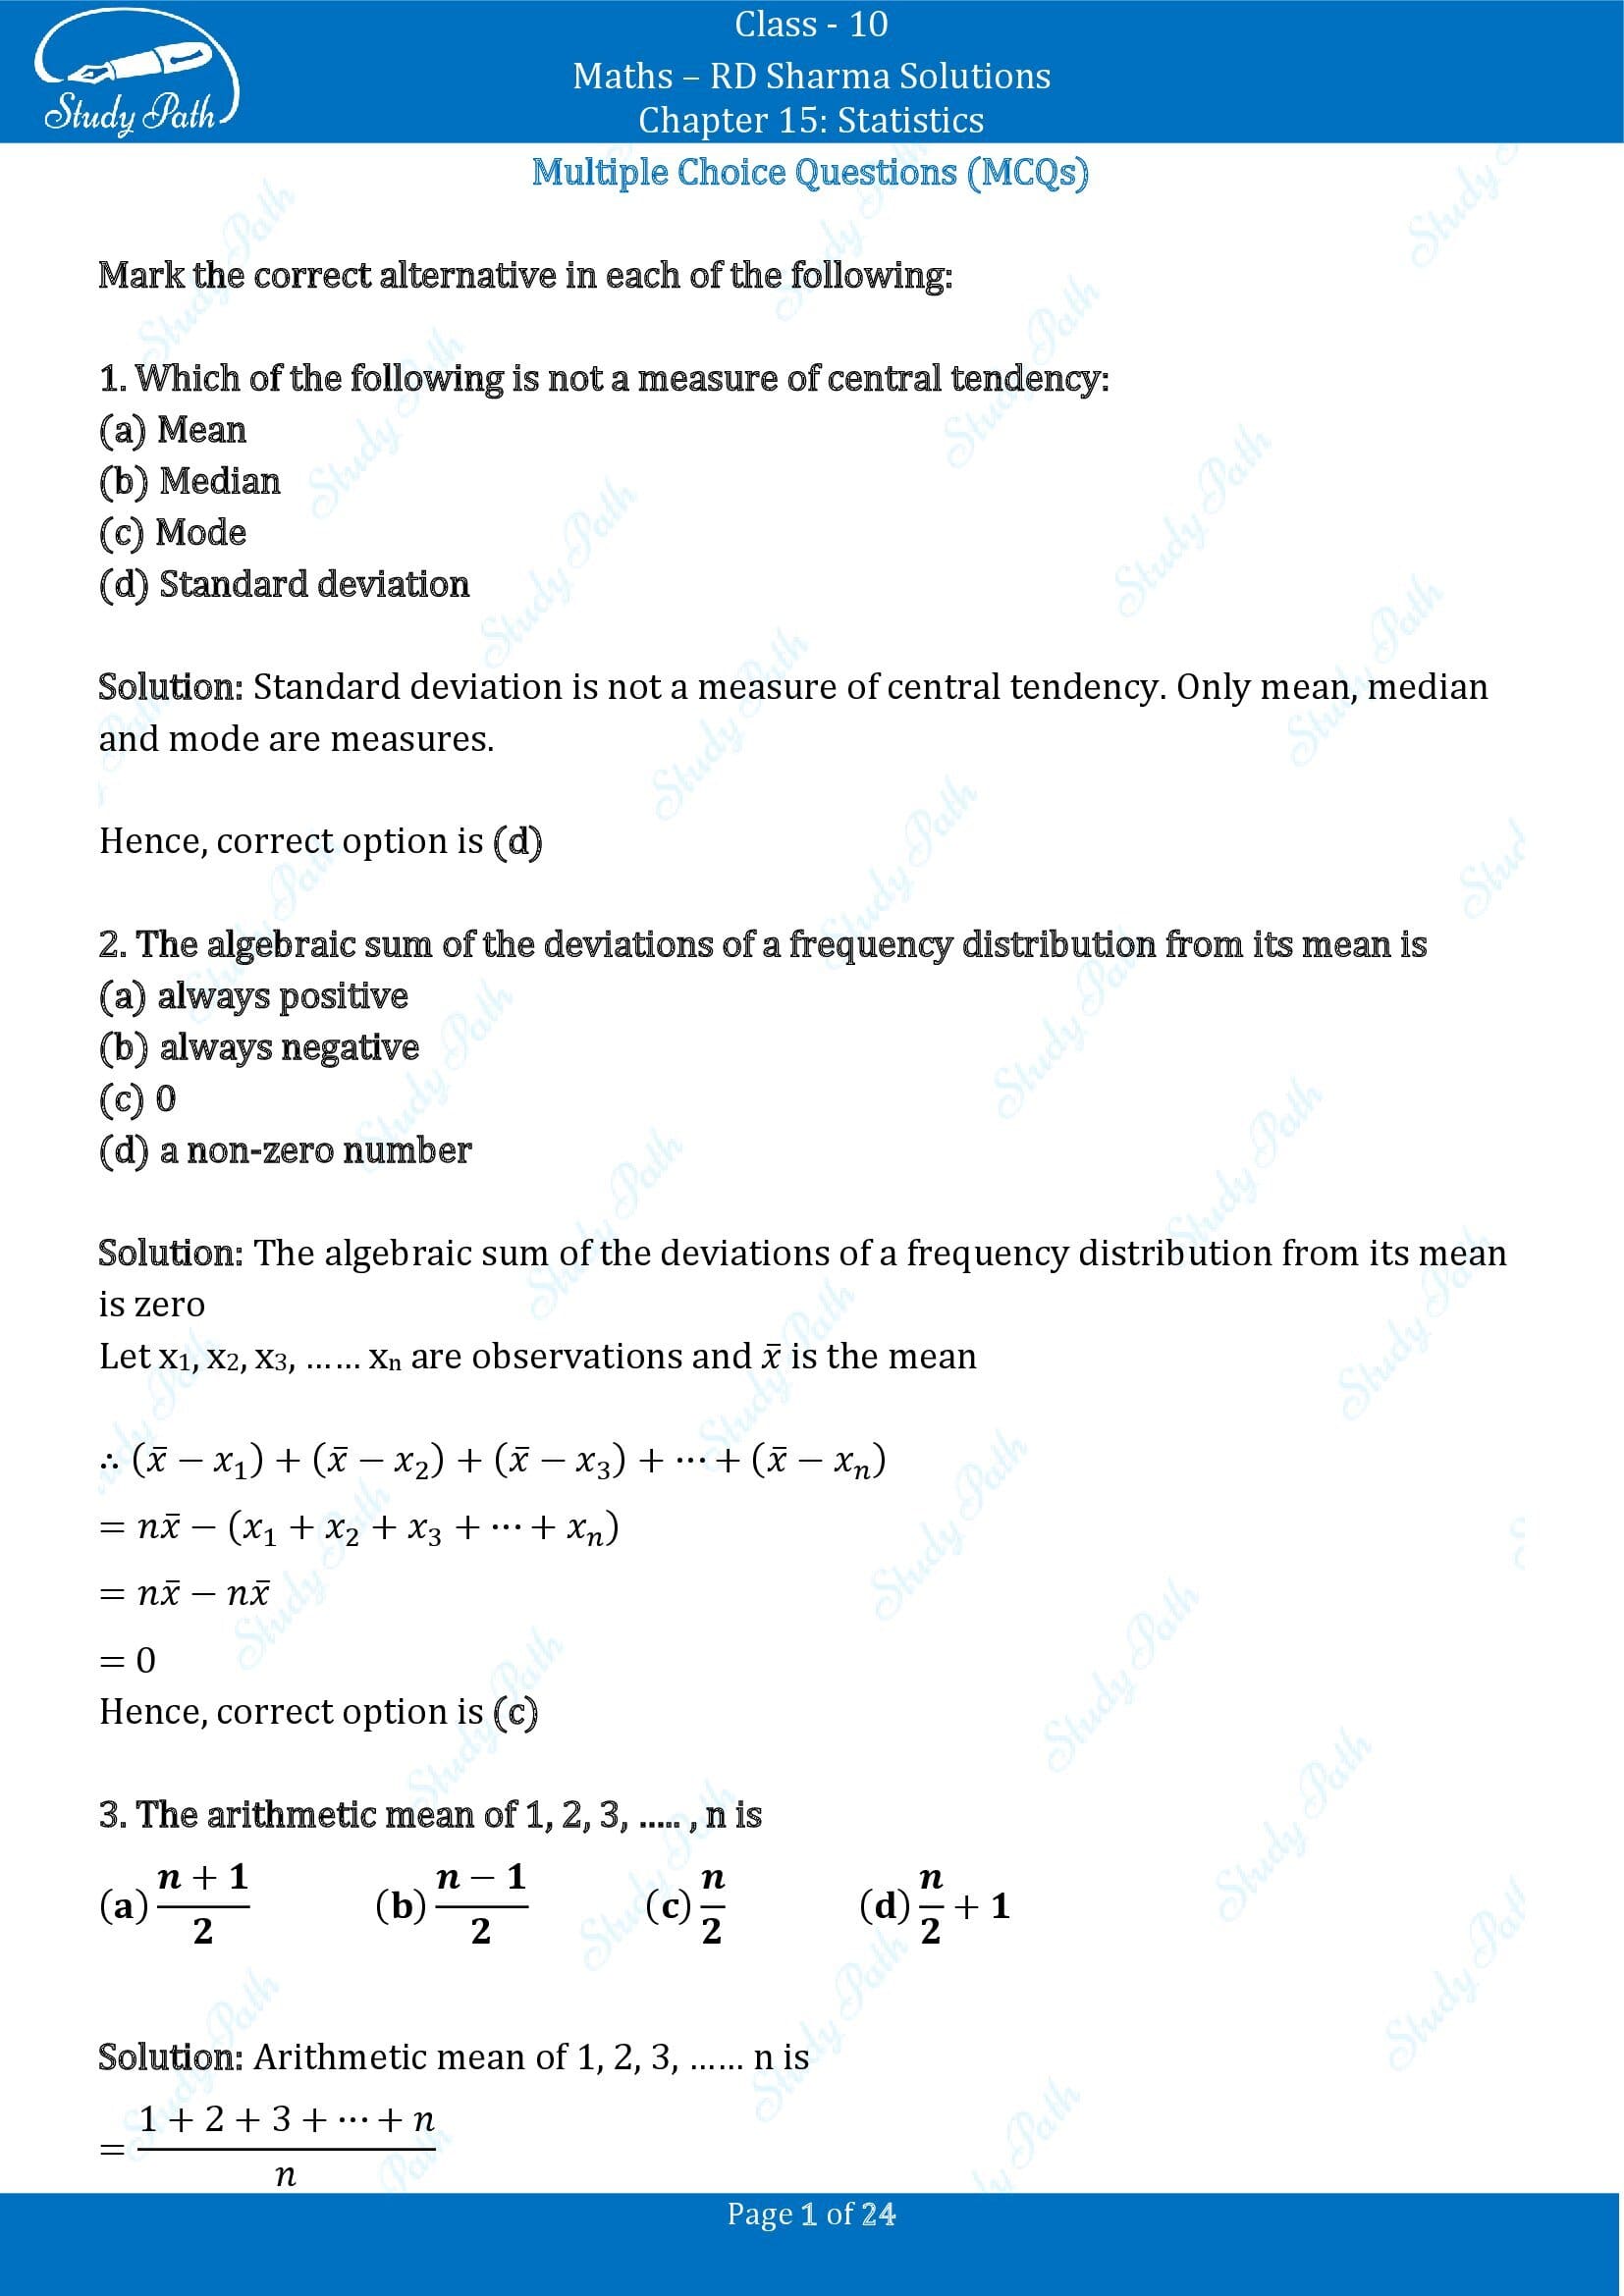 RD Sharma Solutions Class 10 Chapter 15 Statistics Multiple Choice Question MCQs 00001